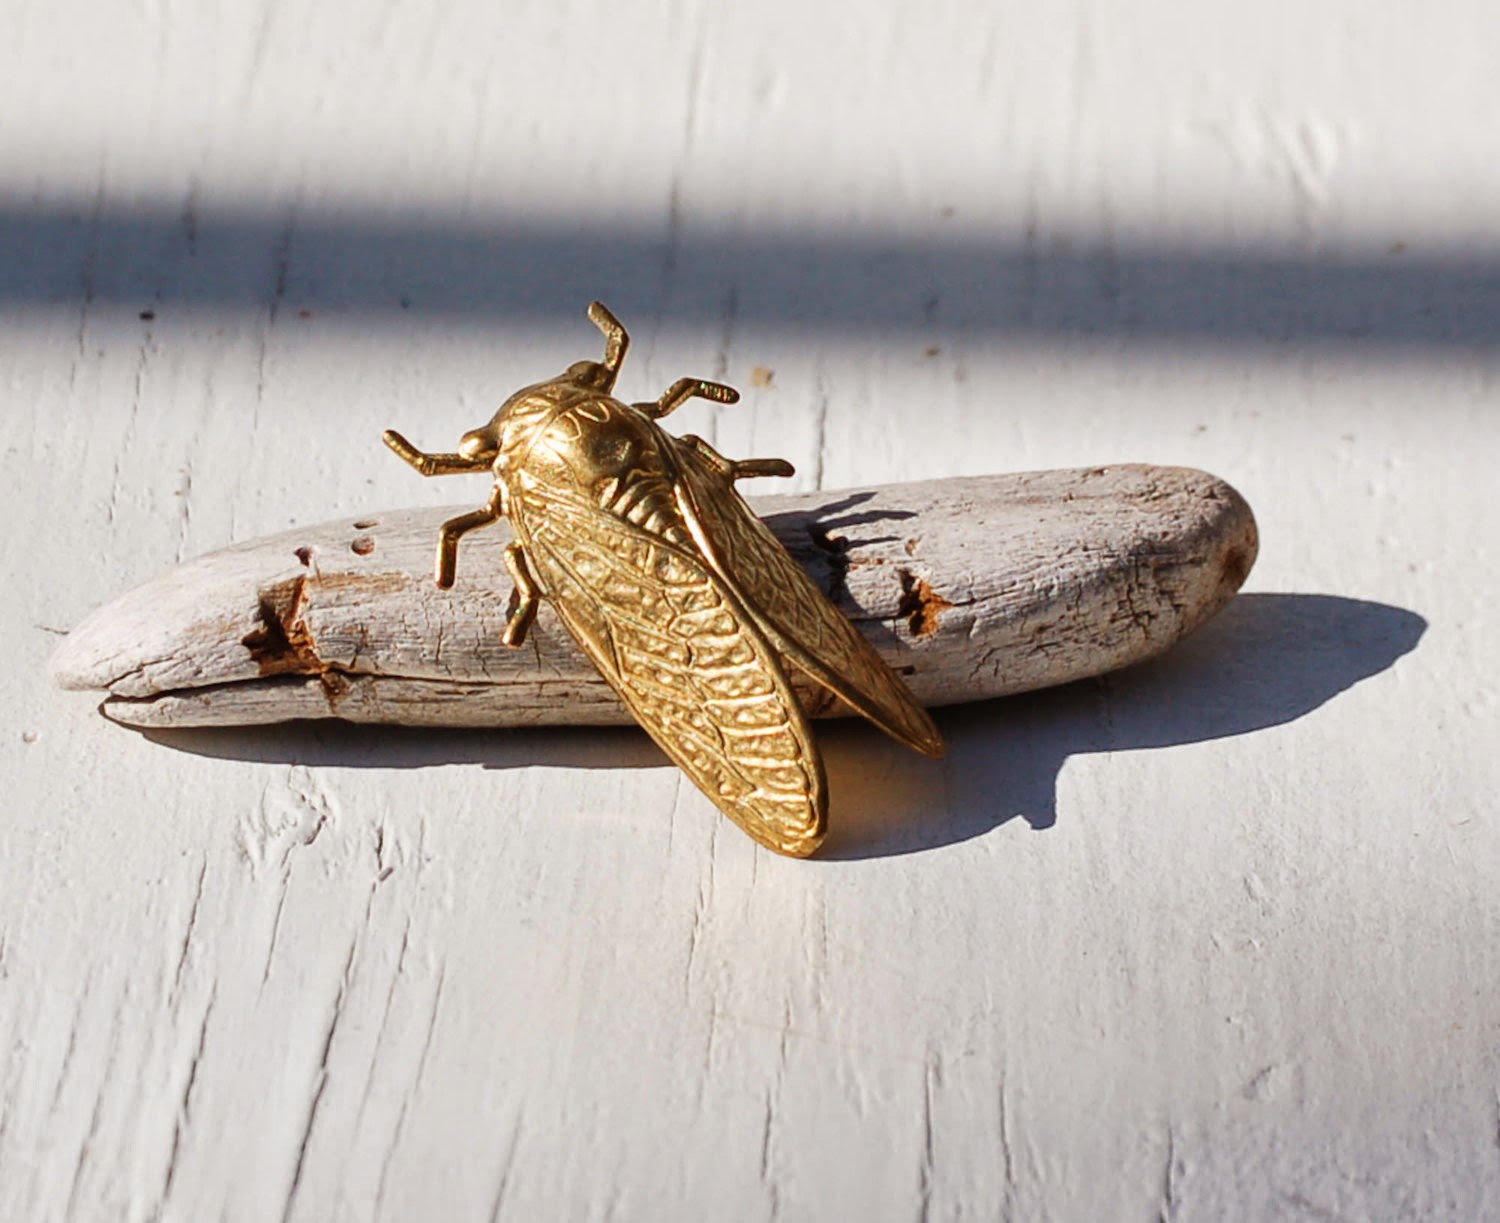 https://www.etsy.com/listing/165611302/cicada-brooch-insect-pin-golden-brass?ref=shop_home_active_3&ga_search_query=beetle